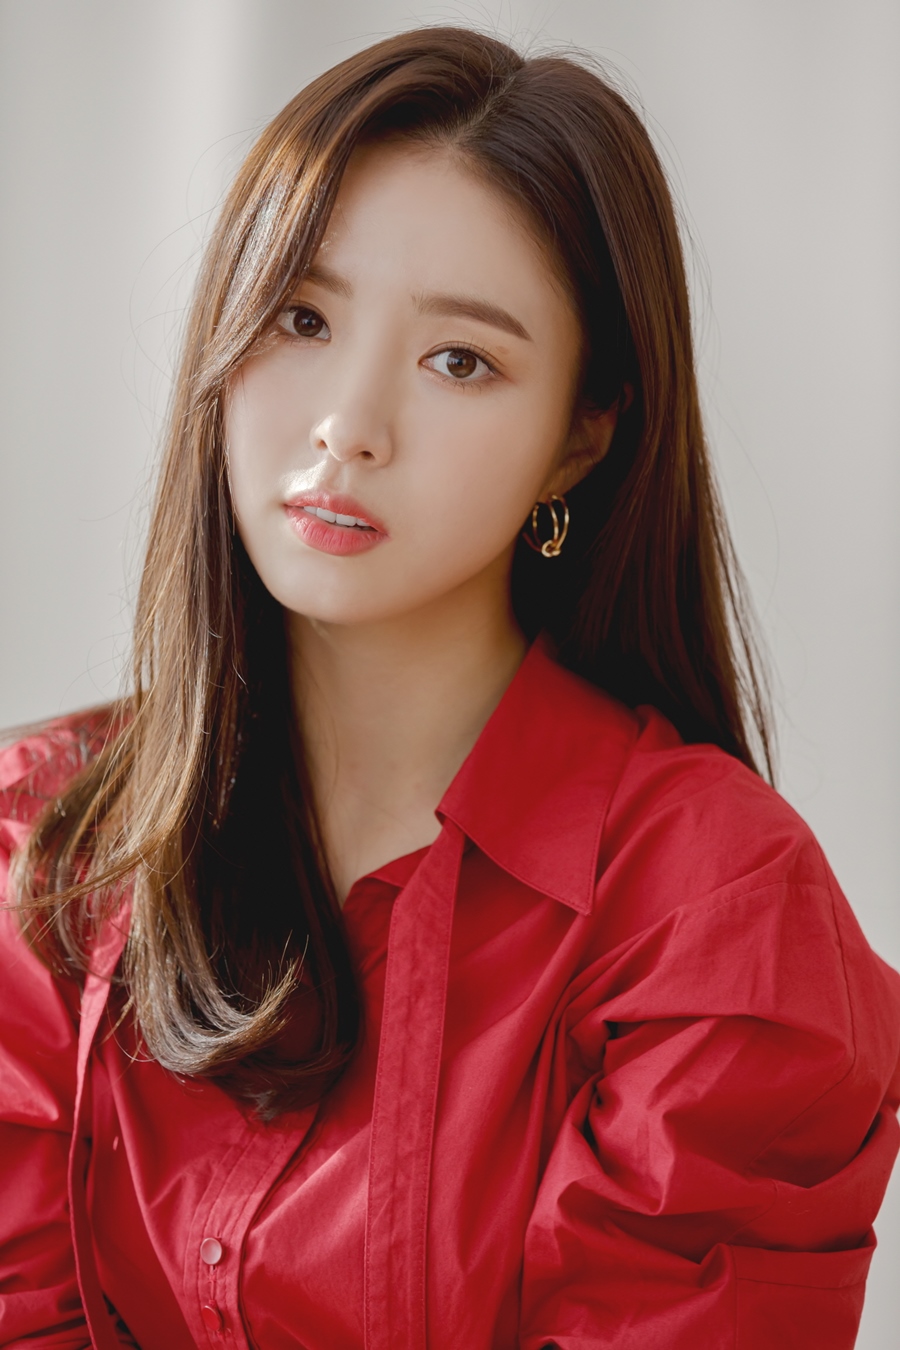 Actor Shin Se-kyung confirms JTBCs new Drama Run on appearanceActor Shin Se-kyung will return to the role of Oh miju, the main character of JTBCs new drama Runon in the second half of this year, said his agency Tree Ectus.Runon is a romance drama about the love of two people, a man who runs only in front of him and a woman who inevitably has to look back.Shin Se-kyung plays a foreign currency translator with an enterprising tendency and a candid youth Oh miju with emotion.Shin Se-kyung hopes how Shin Se-kyung will express the coolness of the Americas, which has a good sense of reality and good and dislike.The news that Shin Se-kyung is coming back as a romance drama is welcome news for the Drama fans who have been waiting for his melodrama.As an actor who shows his attraction with lyrical eyes even though he emits a bright and lovely charm, he was asked to see Shin Se-kyungs romance.The Shin Se-kyung Actor is eligible to express the three-dimensional appearance of youth, said an official from the Runon.Im looking forward to the romance of Shin Se-kyung, he said.Shin Se-kyung debuted in 1998 as a poster model for the Seo Taiji Take 5, and was loved for appearing in High Kick Through the Roof, Deep Rooted Tree, Kwon Ryong I Narsa and Black Knight.It has broadened its spectrum from historical drama to romance.Last year, MBC Drama Na Hae-ryung became the title roll Na Hae-ryung, winning the Grand Prize at the end of the year and becoming the believing actor.In addition, through the YouTube channel Jinsanuna, I am surprised by the unusual move to reveal small daily life.JTBCs new drama Runon is a work that coincides with Lee Jae-hoon, who directed the drama Kims Director, and Park Sihyun, a new artist who is expecting to be an assistant writer of Kim Eun-sook.It is scheduled to be broadcast this winter, finishing casting of major casts such as temporary Wan and shooting in summer.